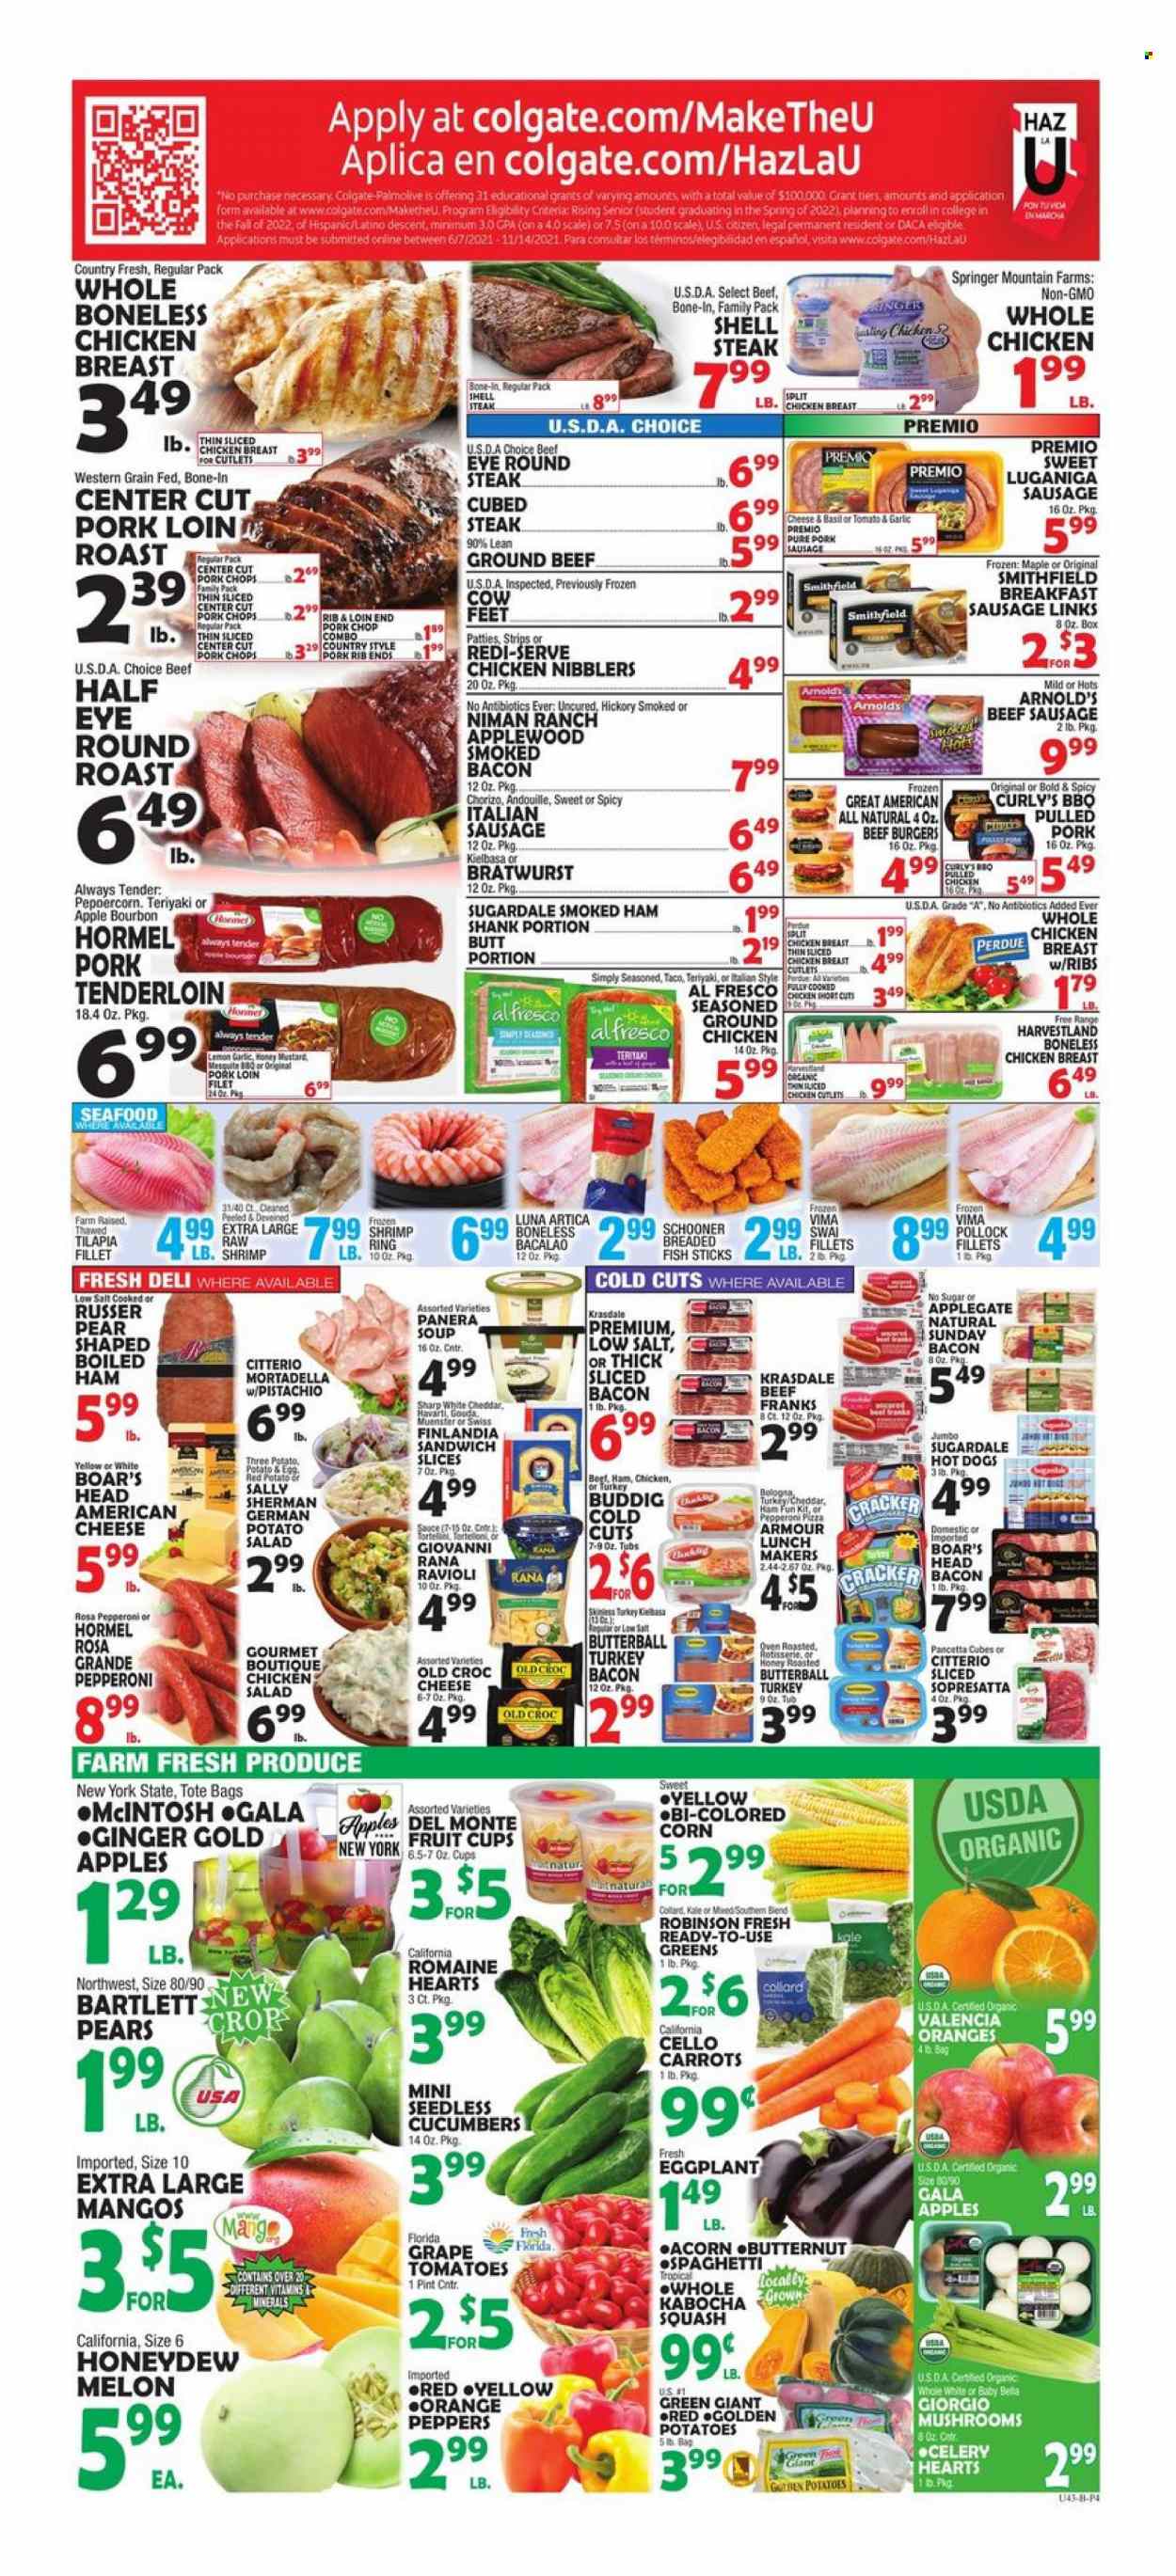 thumbnail - Bravo Supermarkets Flyer - 09/17/2021 - 09/23/2021 - Sales products - mushrooms, fruit cup, carrots, celery, corn, cucumber, tomatoes, potatoes, pumpkin, peppers, eggplant, sleeved celery, Gala, honeydew, oranges, tilapia, pollock, seafood, fish, shrimps, fish fingers, fish sticks, swai fillet, ravioli, hot dog, soup, hamburger, sauce, beef burger, Giovanni Rana, Perdue®, breaded fish, pulled pork, pulled chicken, Rana, Hormel, Sugardale, bacon, Butterball, mortadella, turkey bacon, ham, ham shank, pancetta, chorizo, smoked ham, bratwurst, sausage, pork sausage, pepperoni, italian sausage, kielbasa, potato salad, chicken salad, american cheese, gouda, sandwich slices, Havarti, cheddar, cheese, Münster cheese, strips, crackers, bourbon, Grant's, ground chicken, whole chicken, chicken cutlets, beef meat, ground beef, steak, eye of round, round roast, round steak, sirloin steak, pork chops, pork loin, pork meat, Palmolive, Colgate, melons. Page 4.